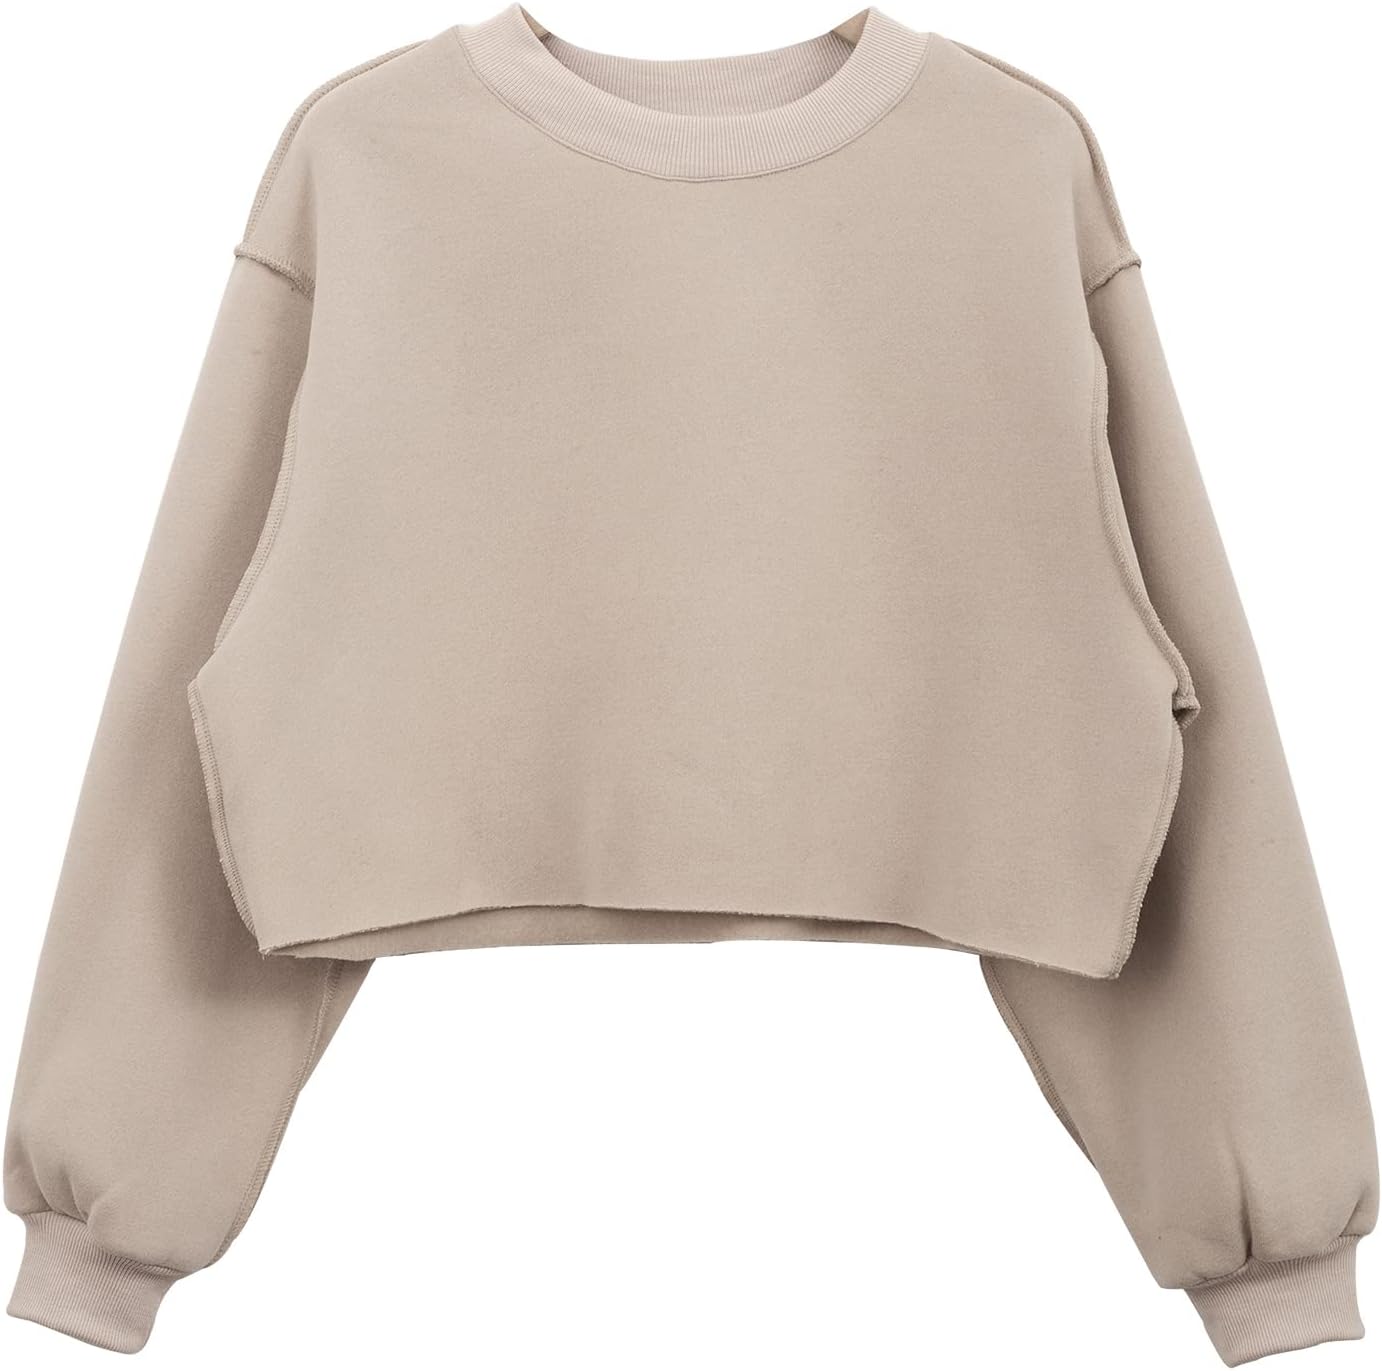 NTG Fad Apricot / XX-Large Women Cropped Long Sleeves Pullover Fleece Crop Tops